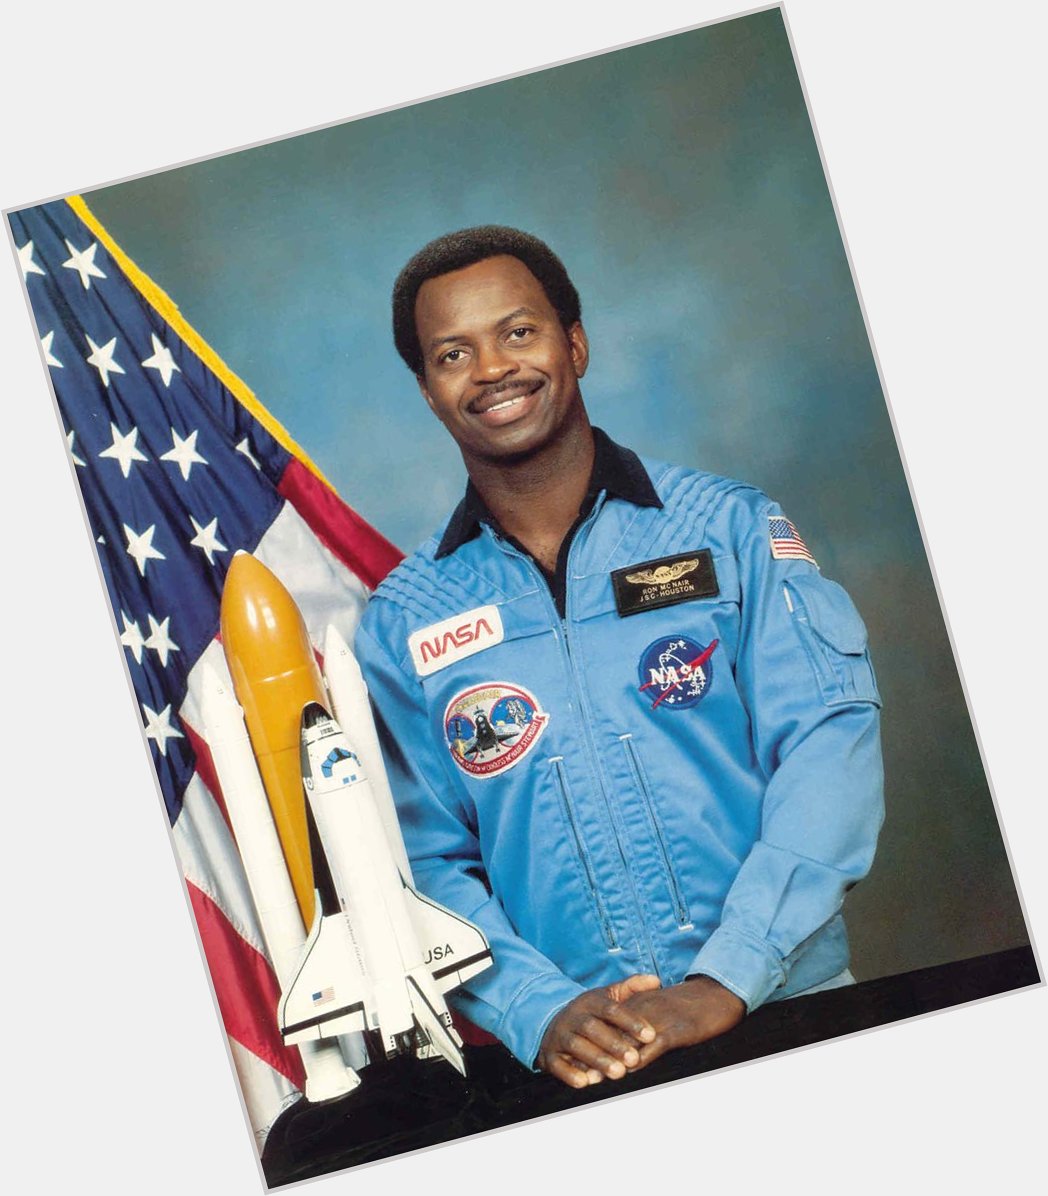 Happy Birthday to Ronald McNair, who would have turned 67 today! 